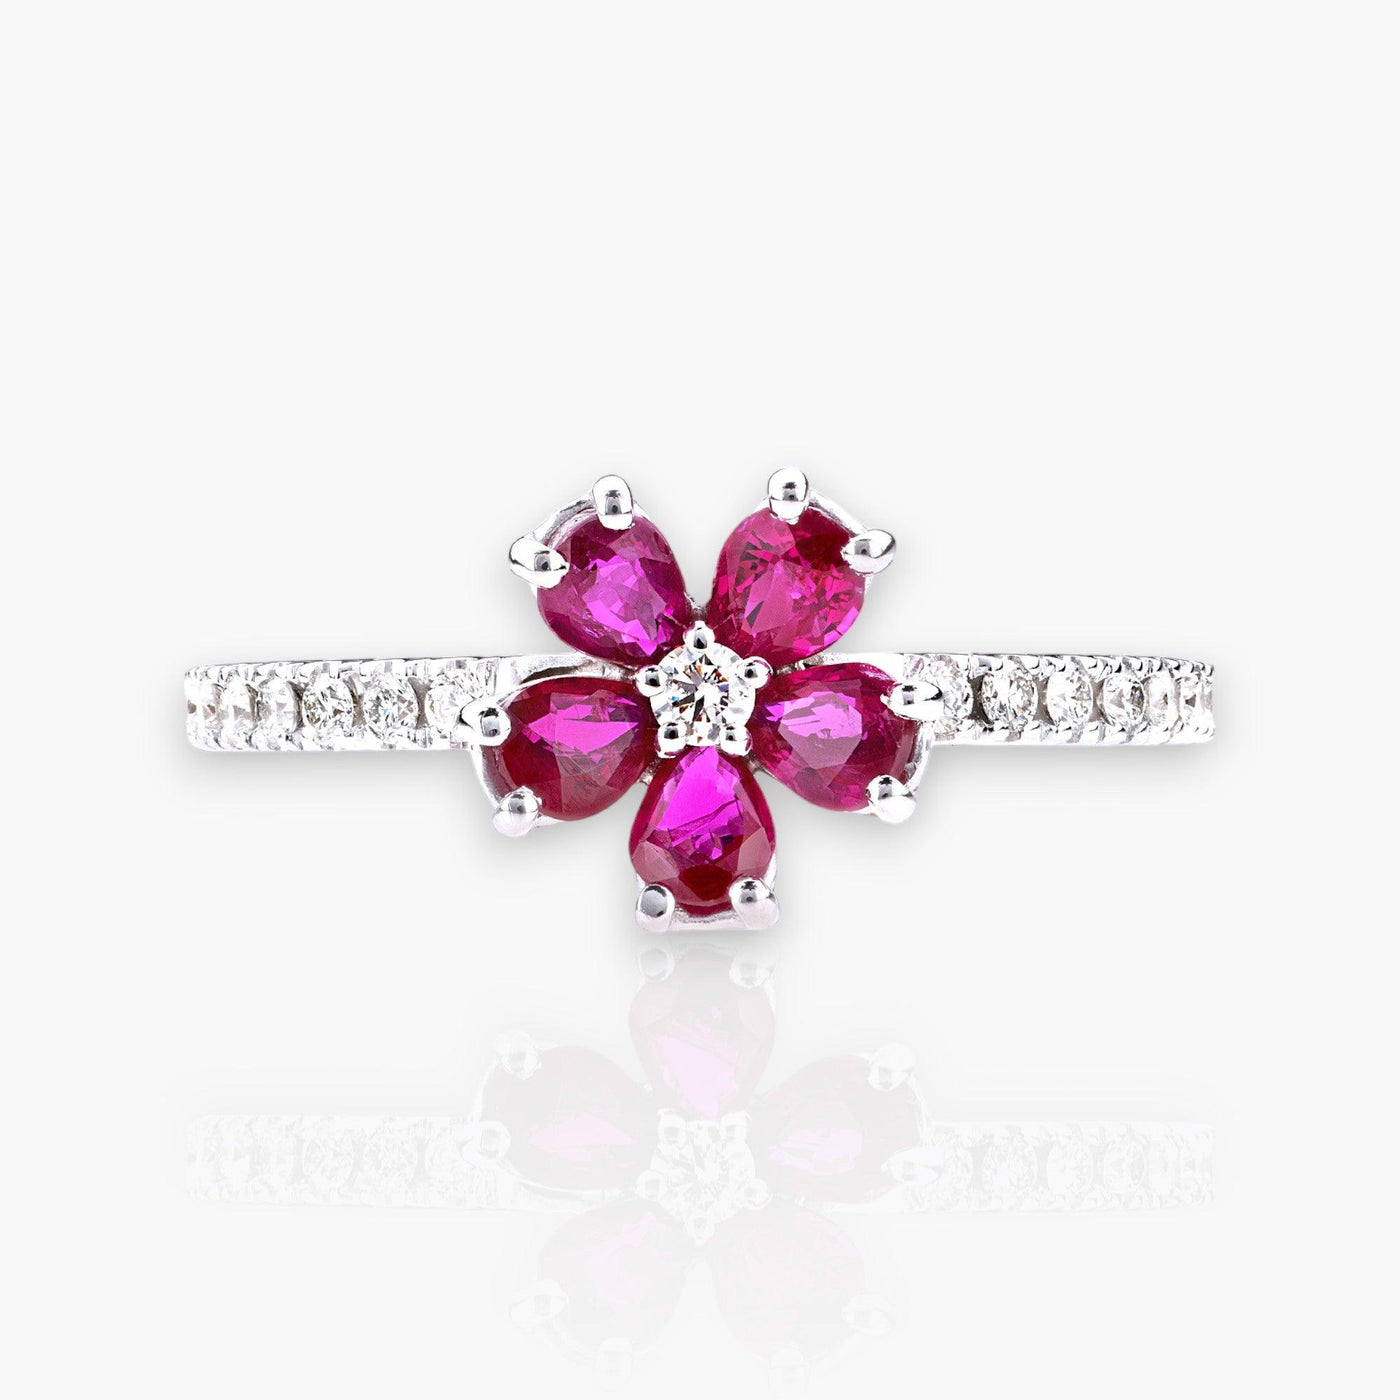 Ring "Cherry Blossom", White Gold, Diamonds And Rubies - Moregola Fine Jewelry